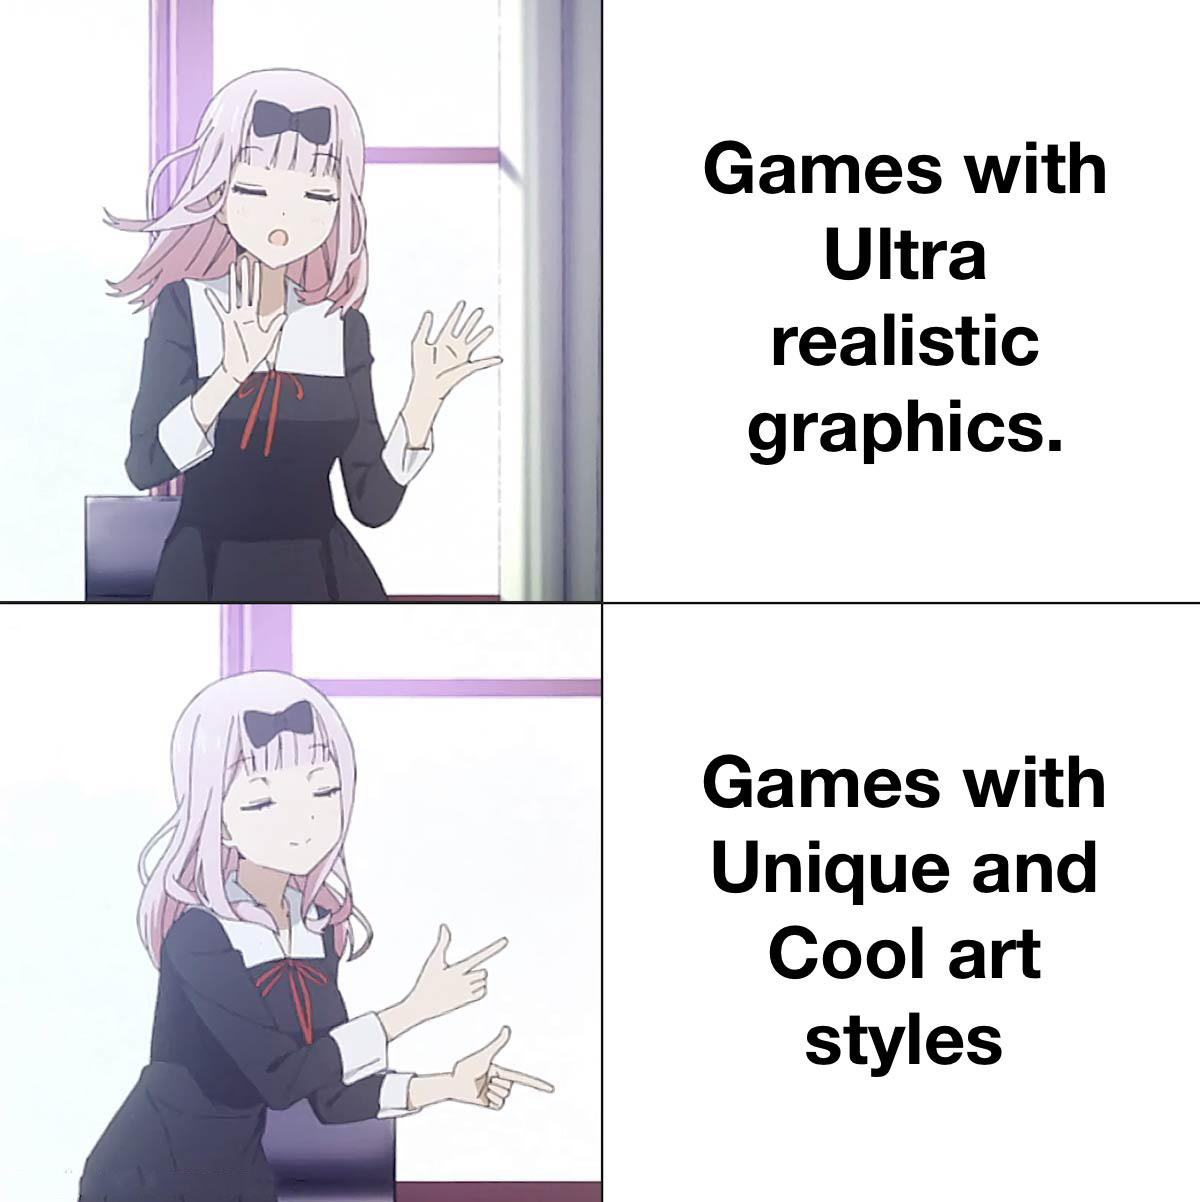 daily dose of memes - Anime - Games with Ultra realistic graphics. Games with Unique and Cool art styles